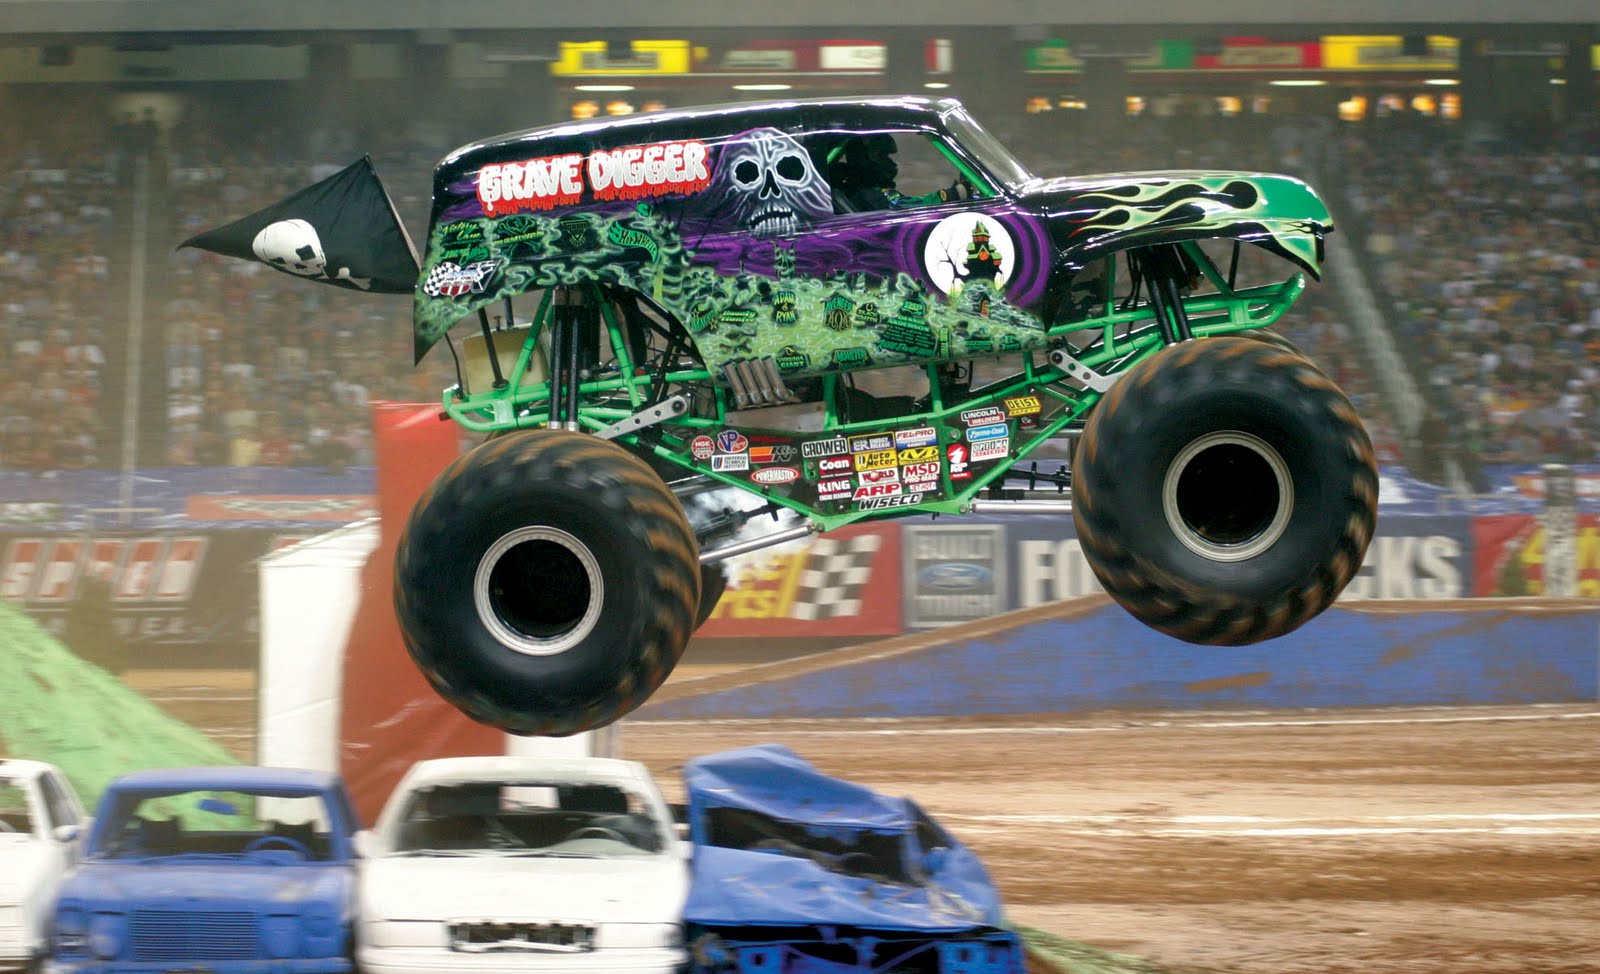 Monster Trucks Grave Digger Wallpaper Image Pictures Becuo